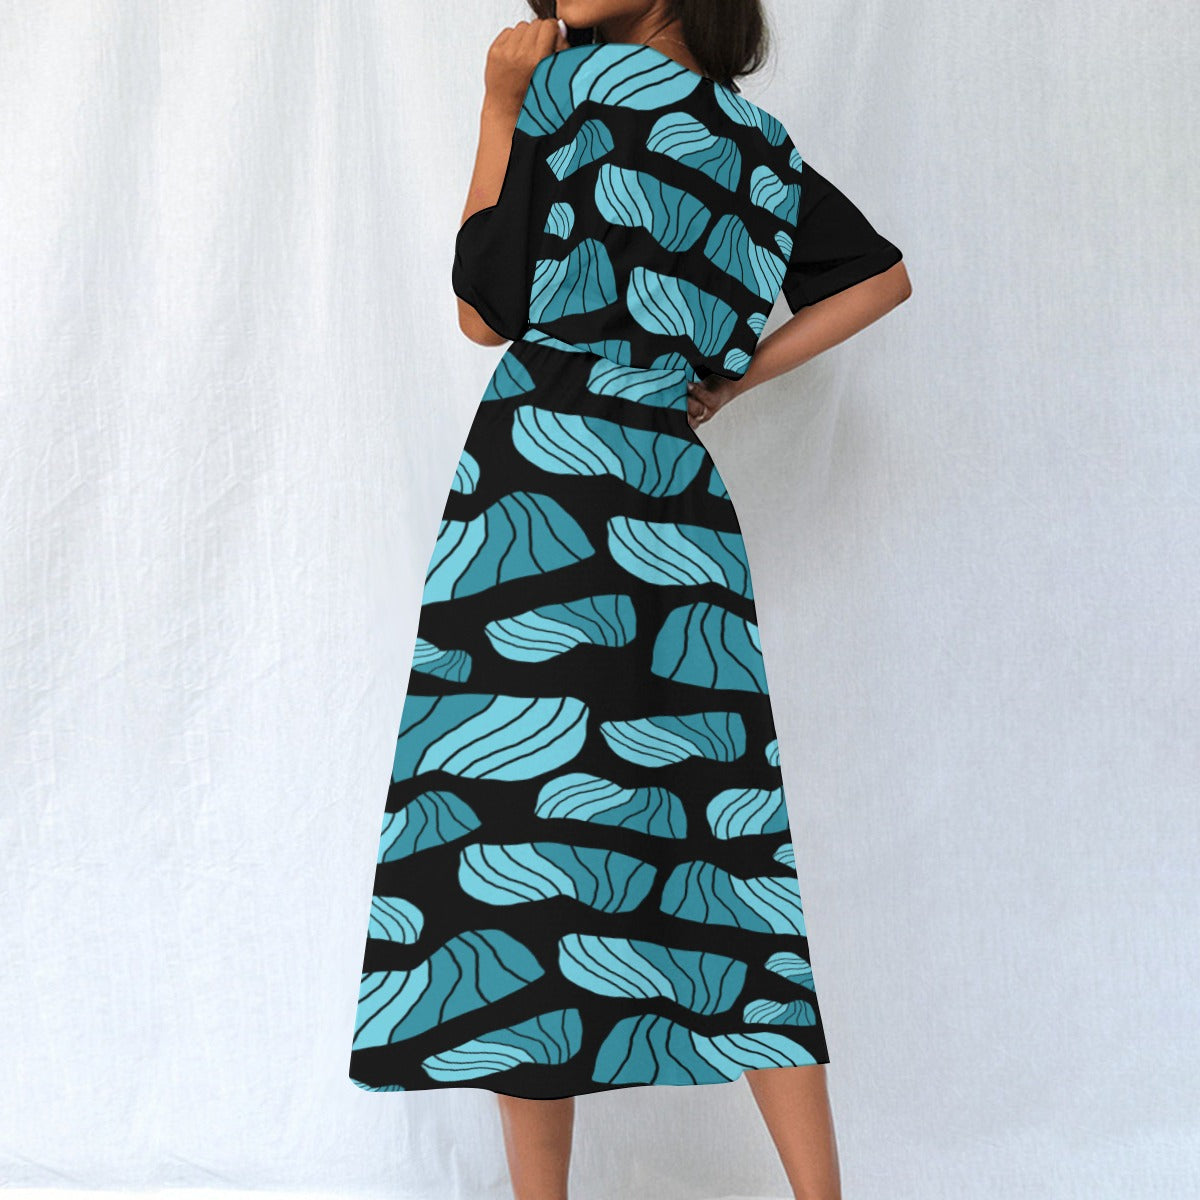 Resilience Sophistication Dress by Koori Threads